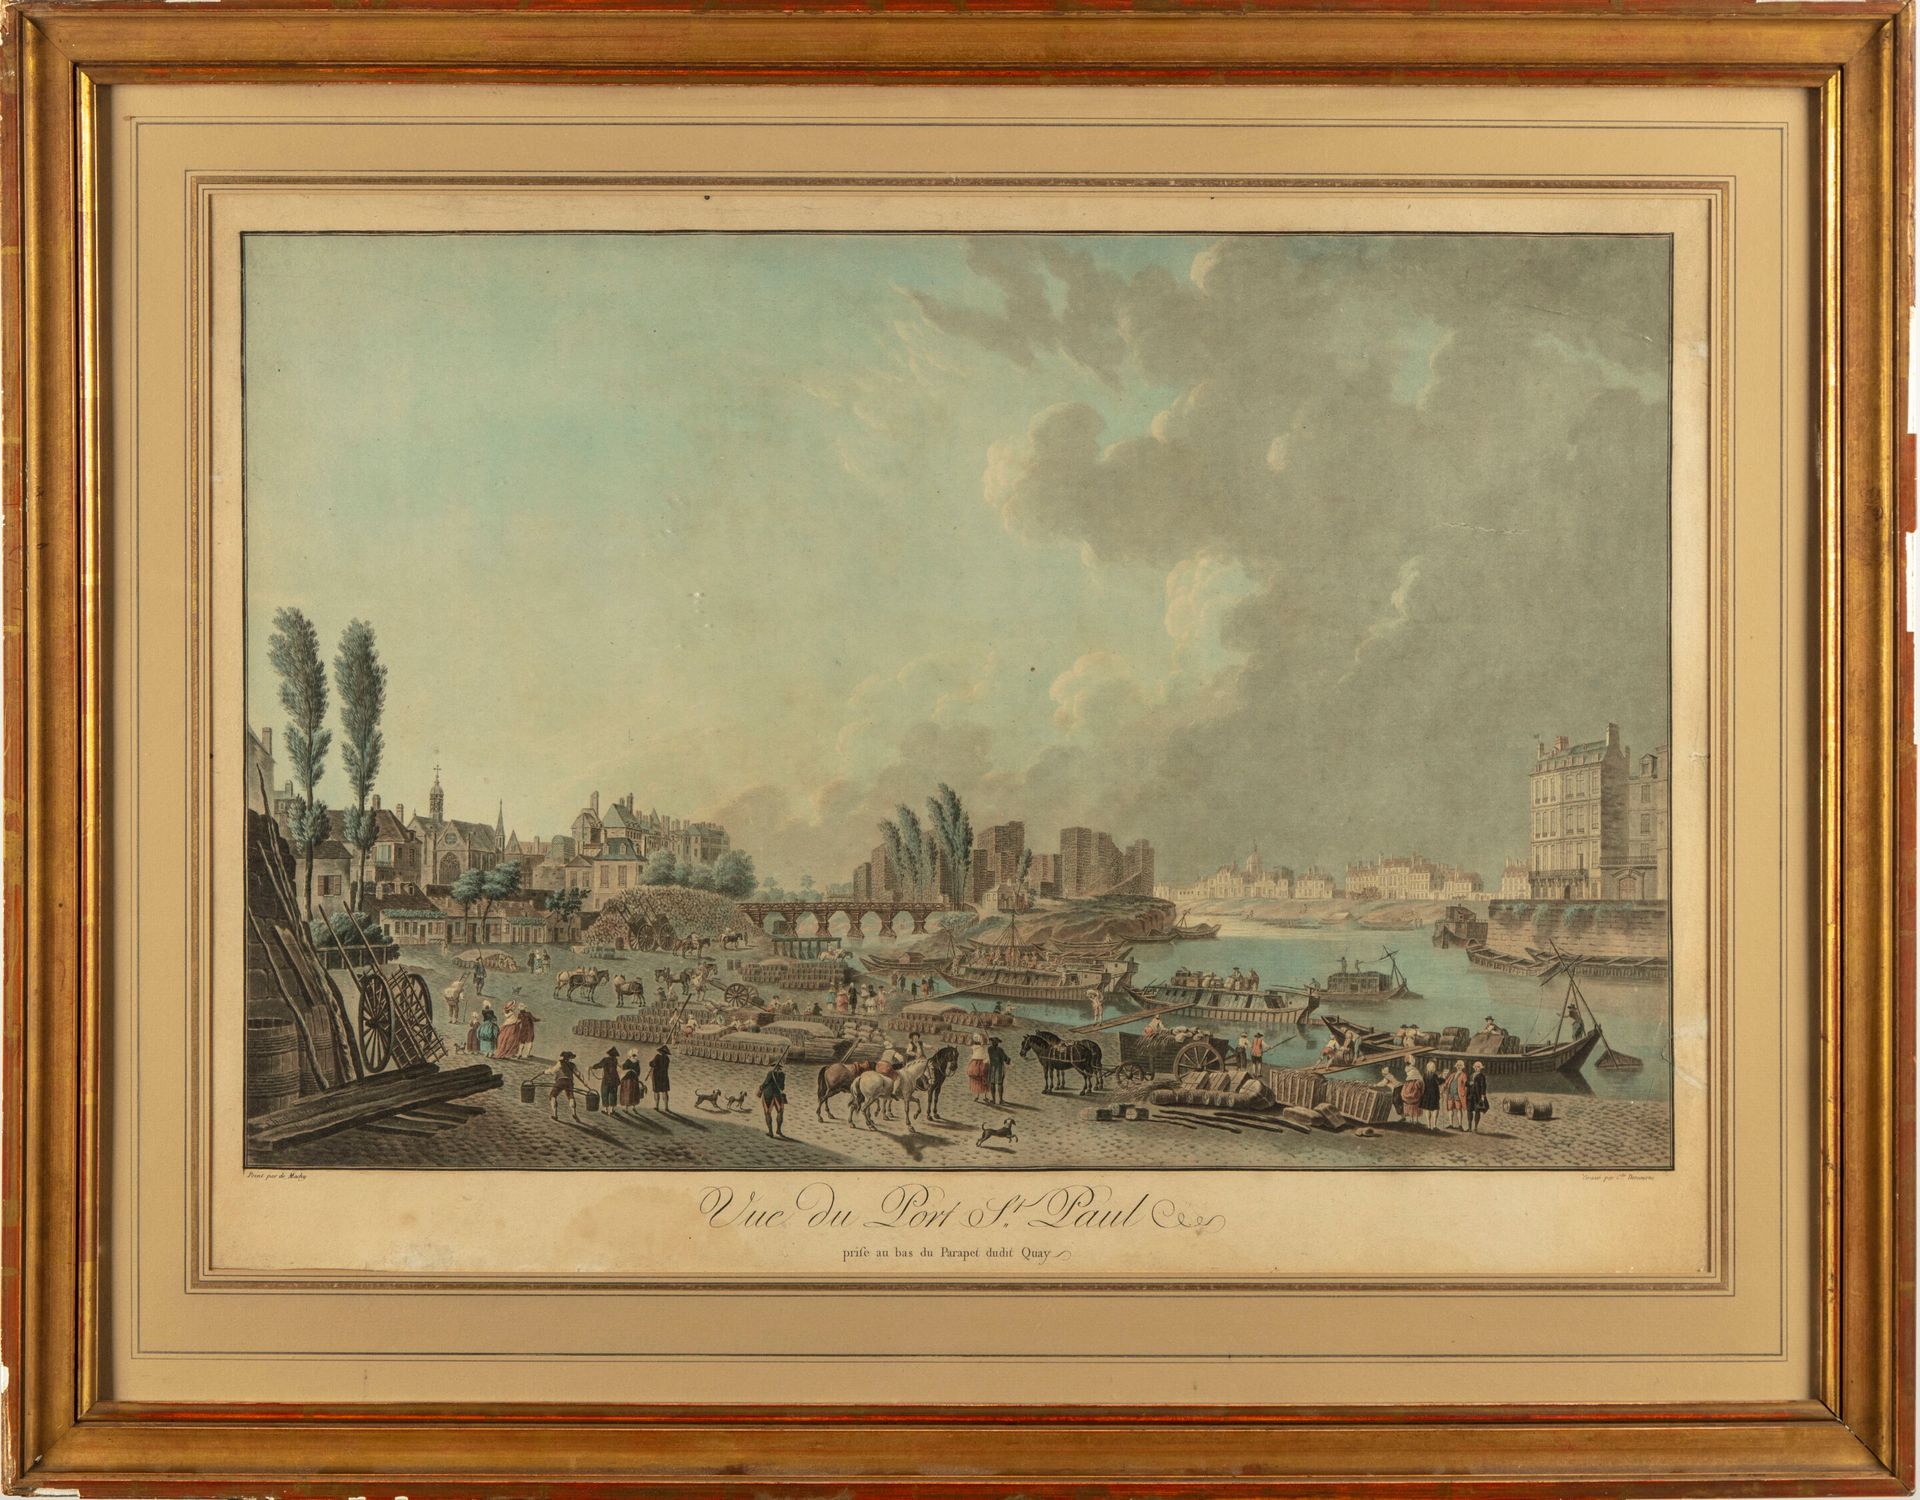 Null After Pierre-Antoine DEMACHY, engraved by DESCOURTIS

View of the port of S&hellip;